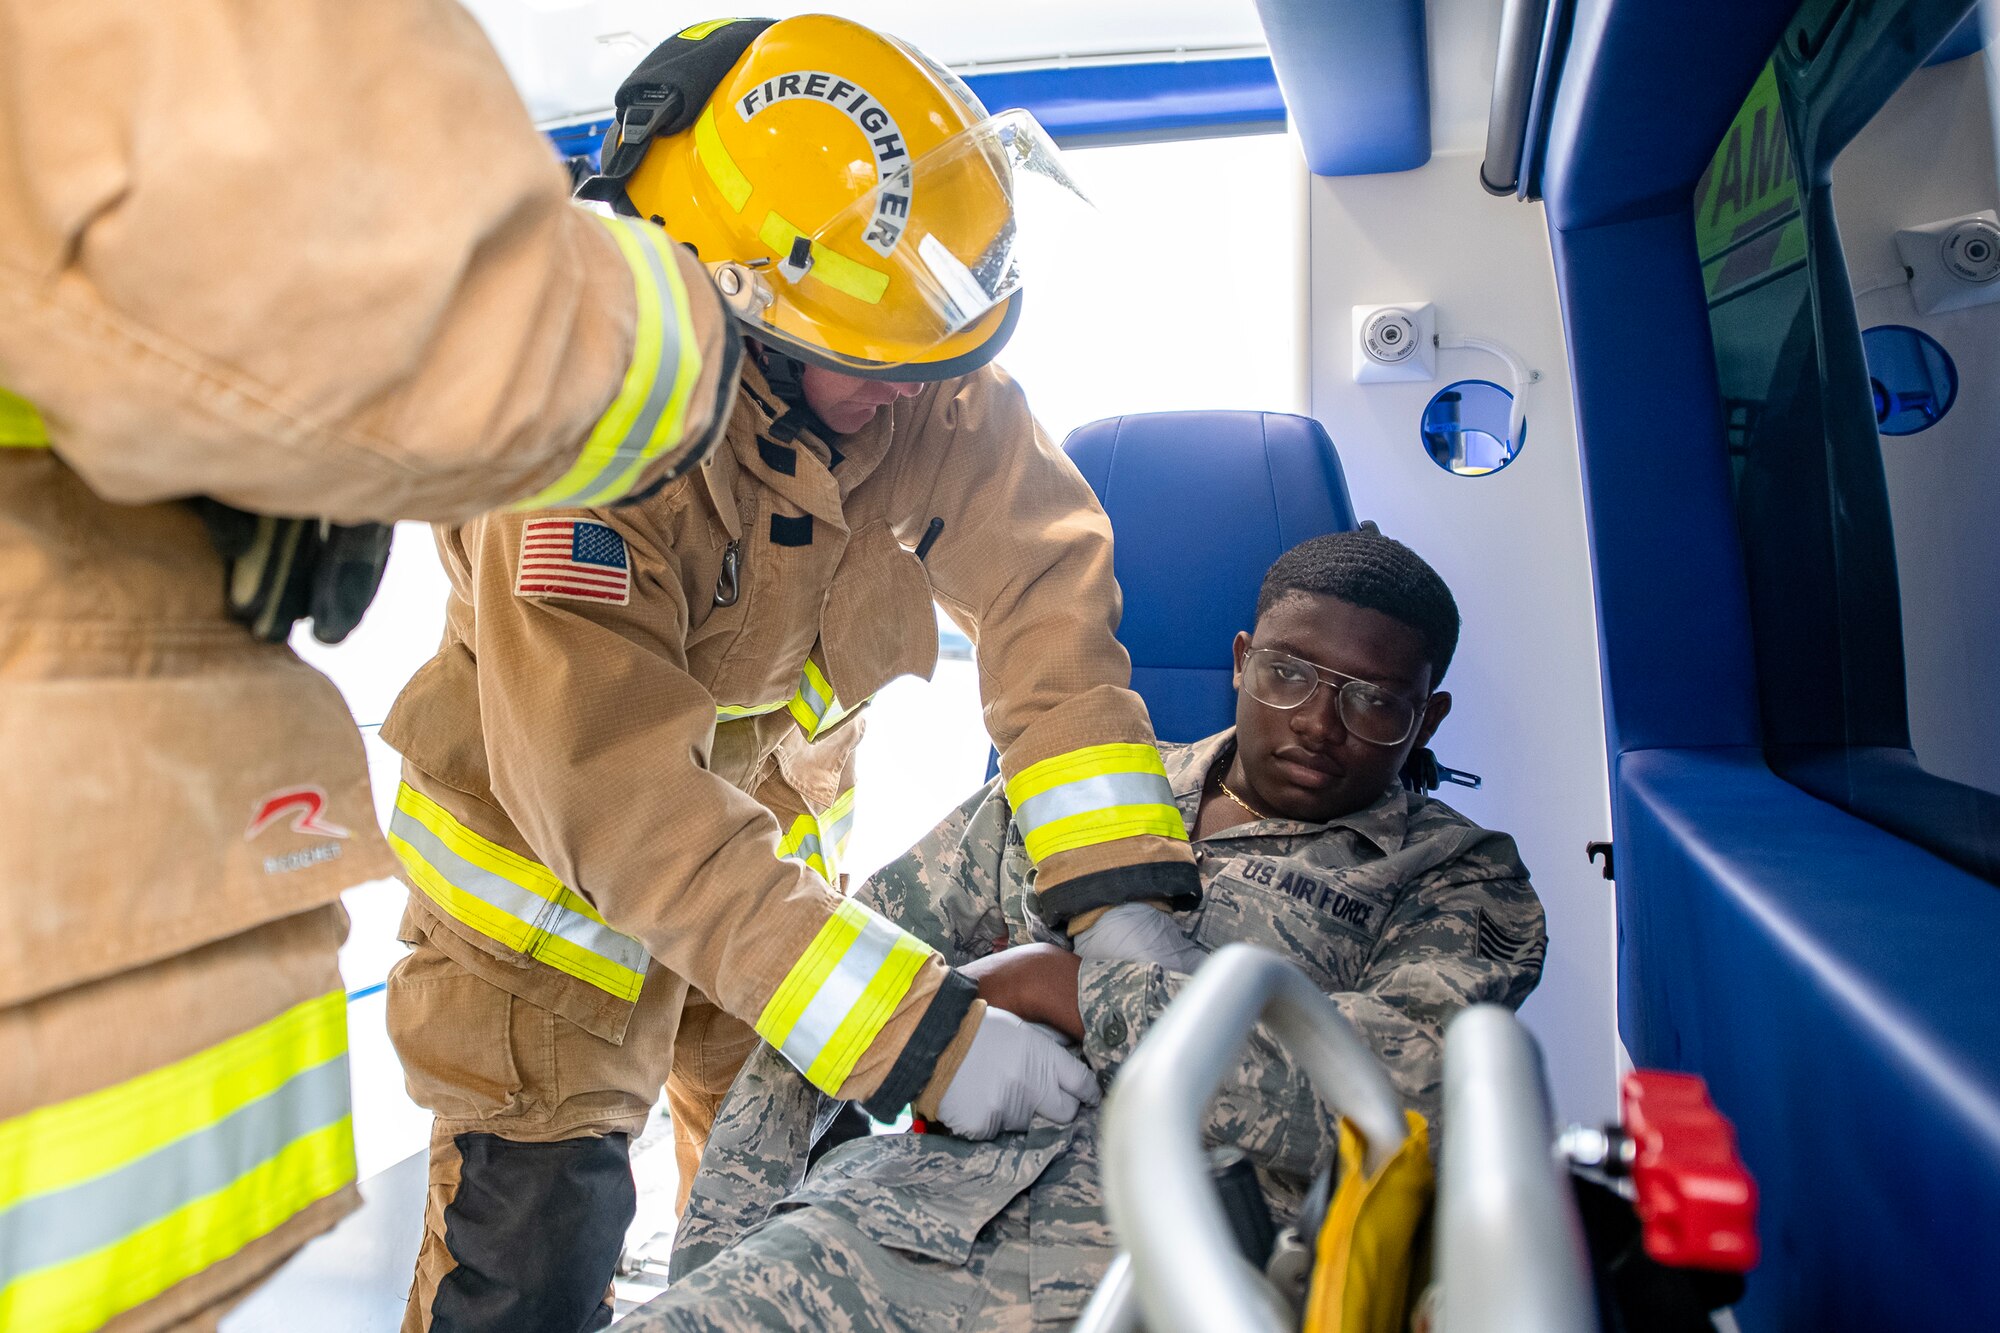 A Firefighter from the 423d Civil Engineer Squadron utilizes tactical combat casualty care on a simulated victim during an active shooter exercise at RAF Alconbury, England, March 16, 2023. The exercise tested the 501st Combat Support Wing on overall readiness and ability to respond to an emergency situation. (U.S. Air Force photo by Staff Sgt. Eugene Oliver)